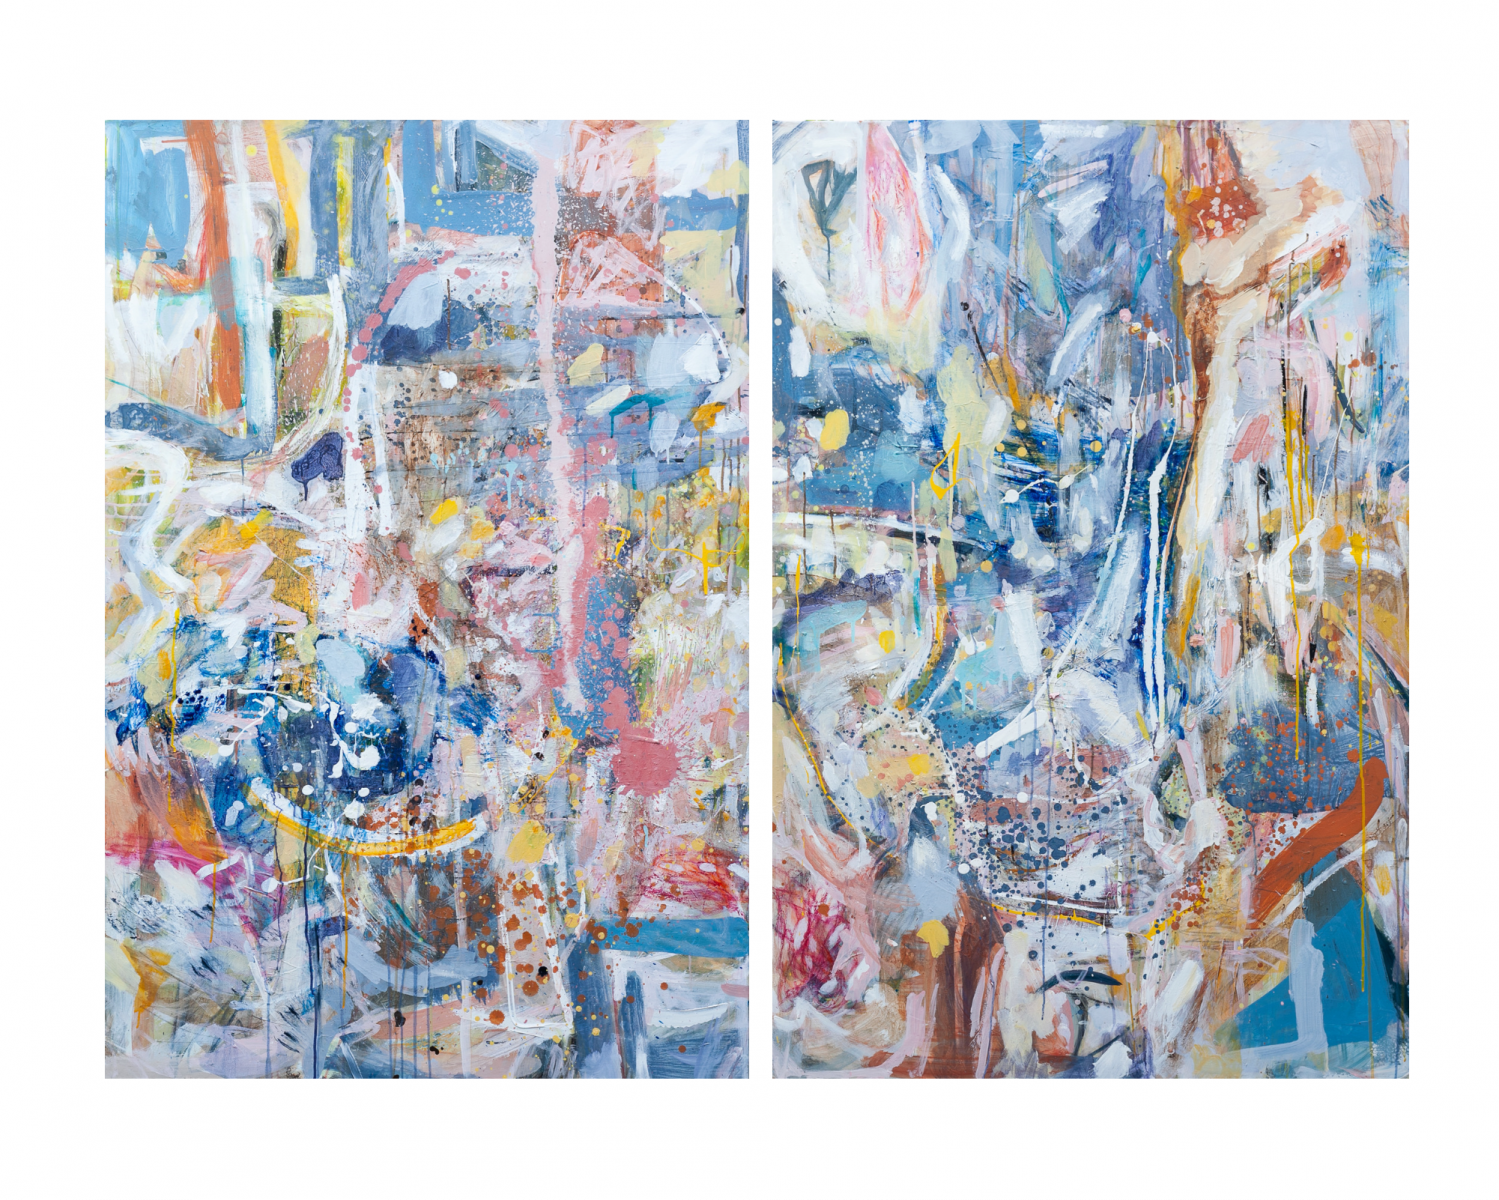 The Rivermouth Fresh and Saltwater Flow I & II | Rosie Lloyd Giblett | Acrylic on canvas | 153 x 203 cm diptych. | $4600